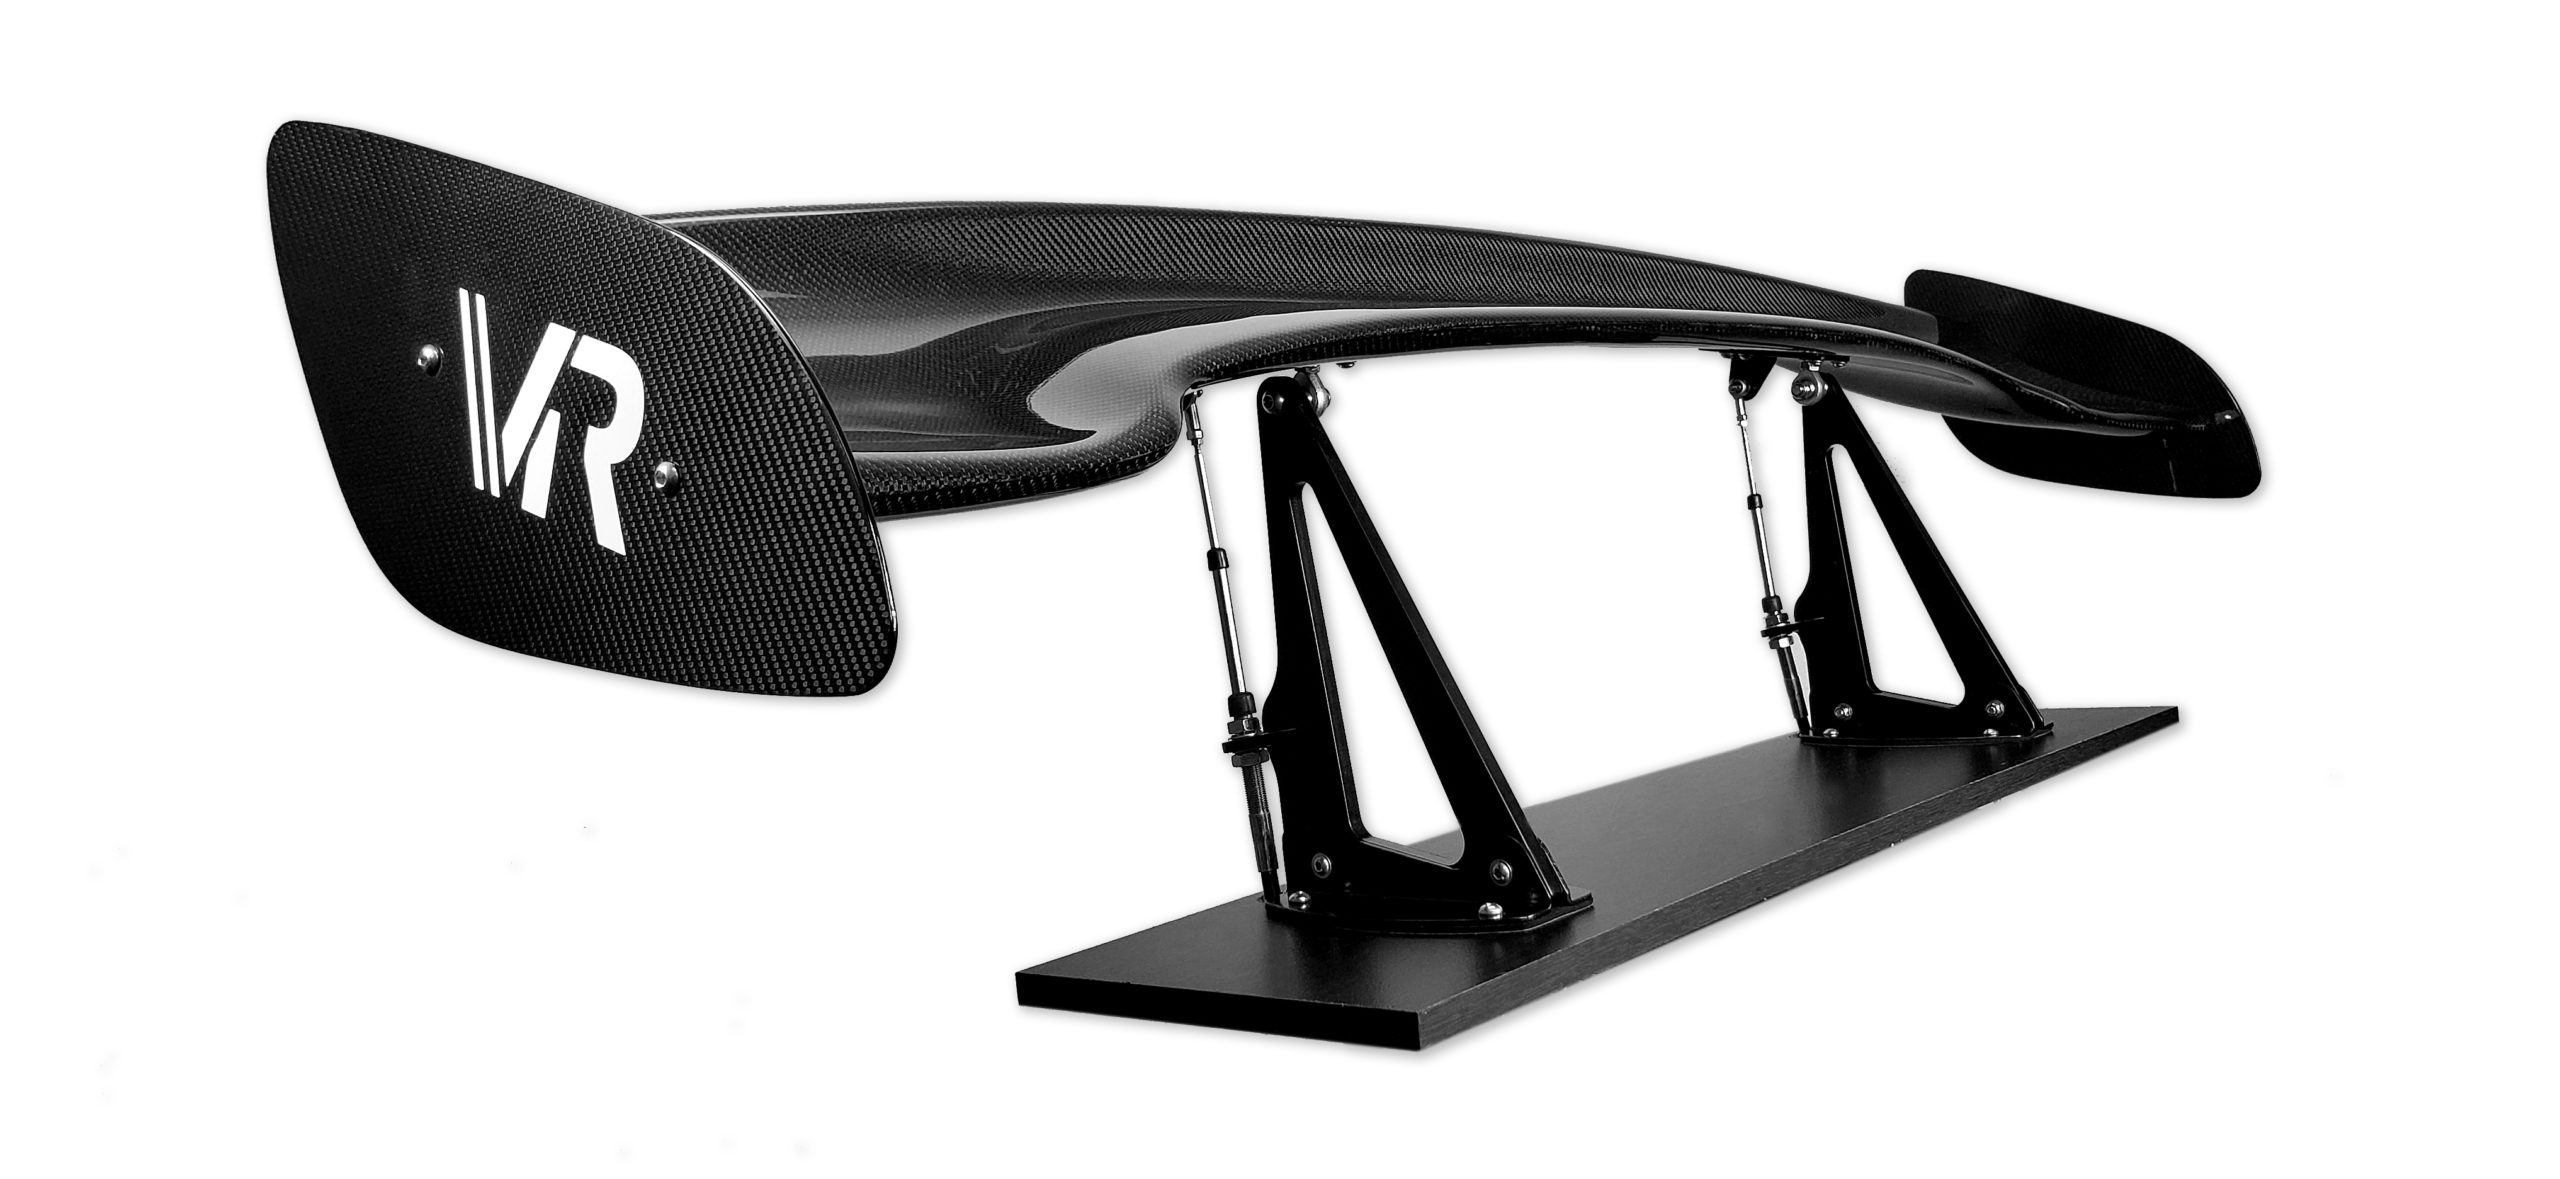 Victor Racing DRS Rear Wing Approved for U.S. Touring Car Championship Series | THE SHOP